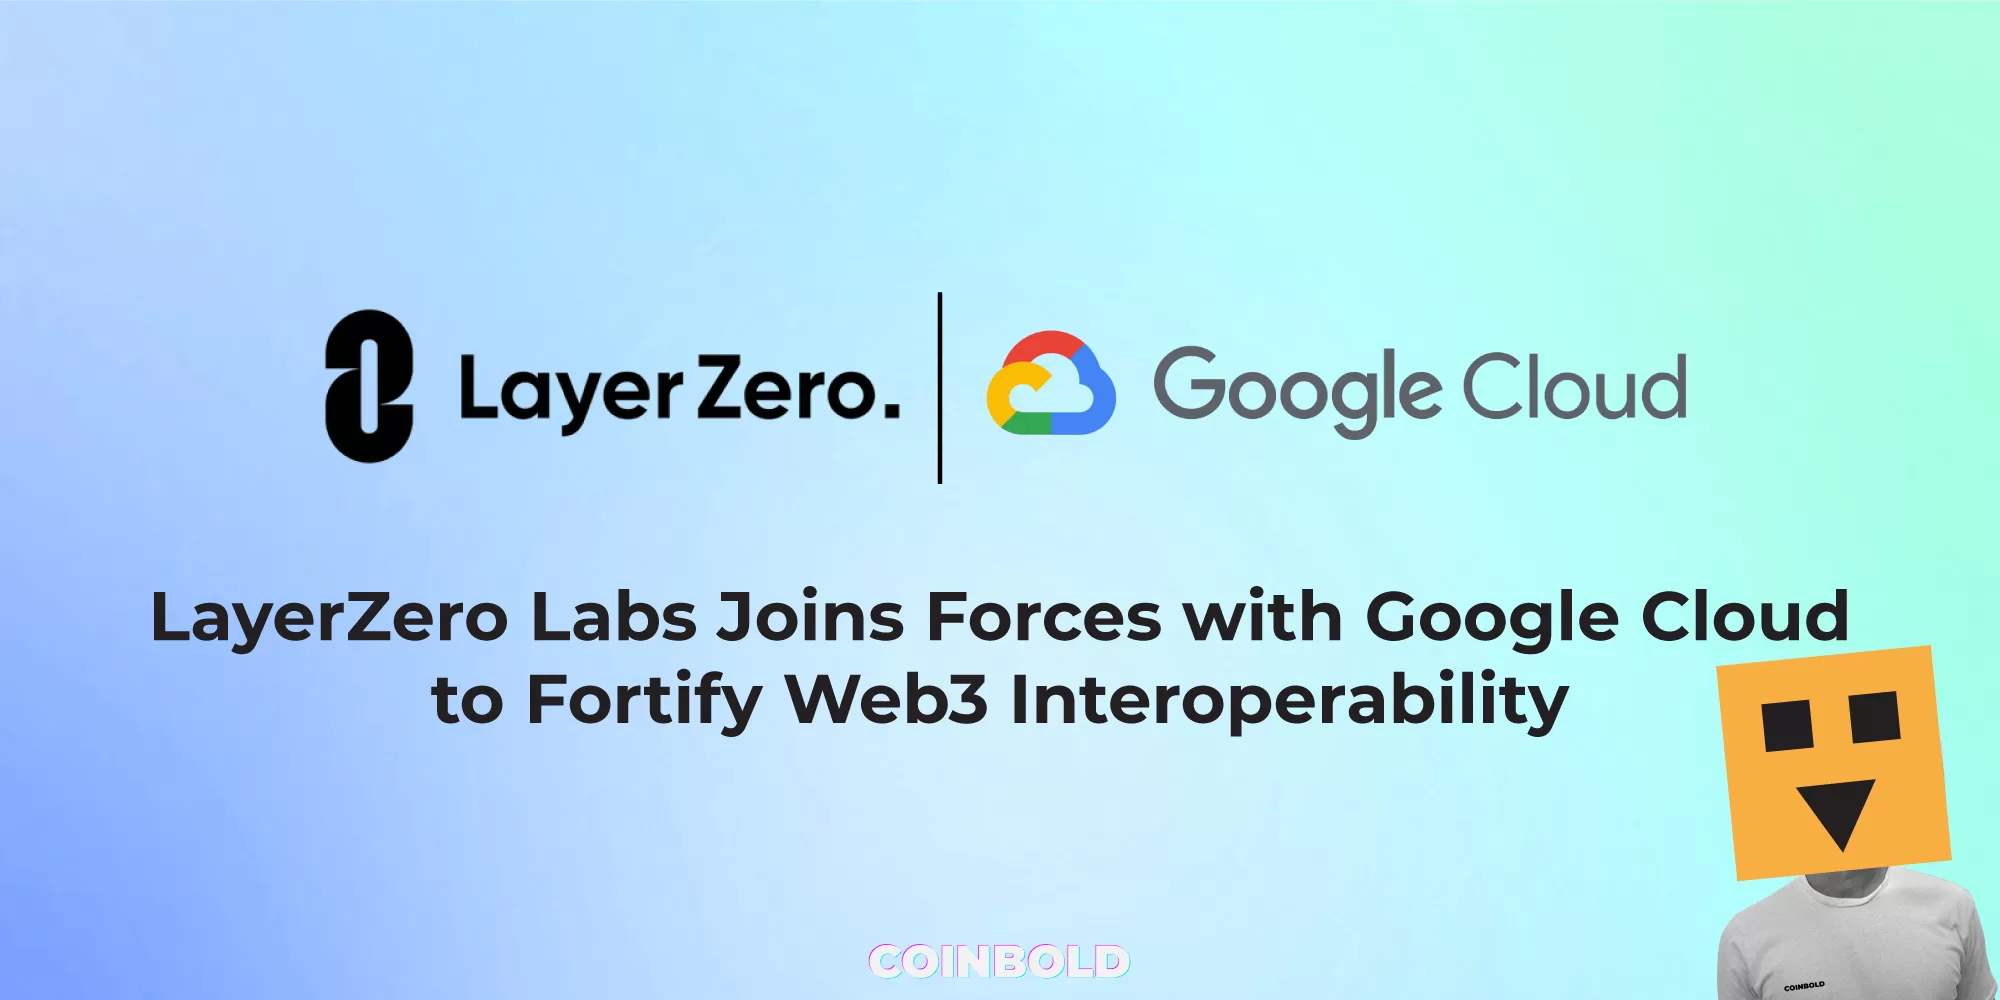 LayerZero Labs Joins Forces with Google Cloud to Fortify Web3 Interoperability